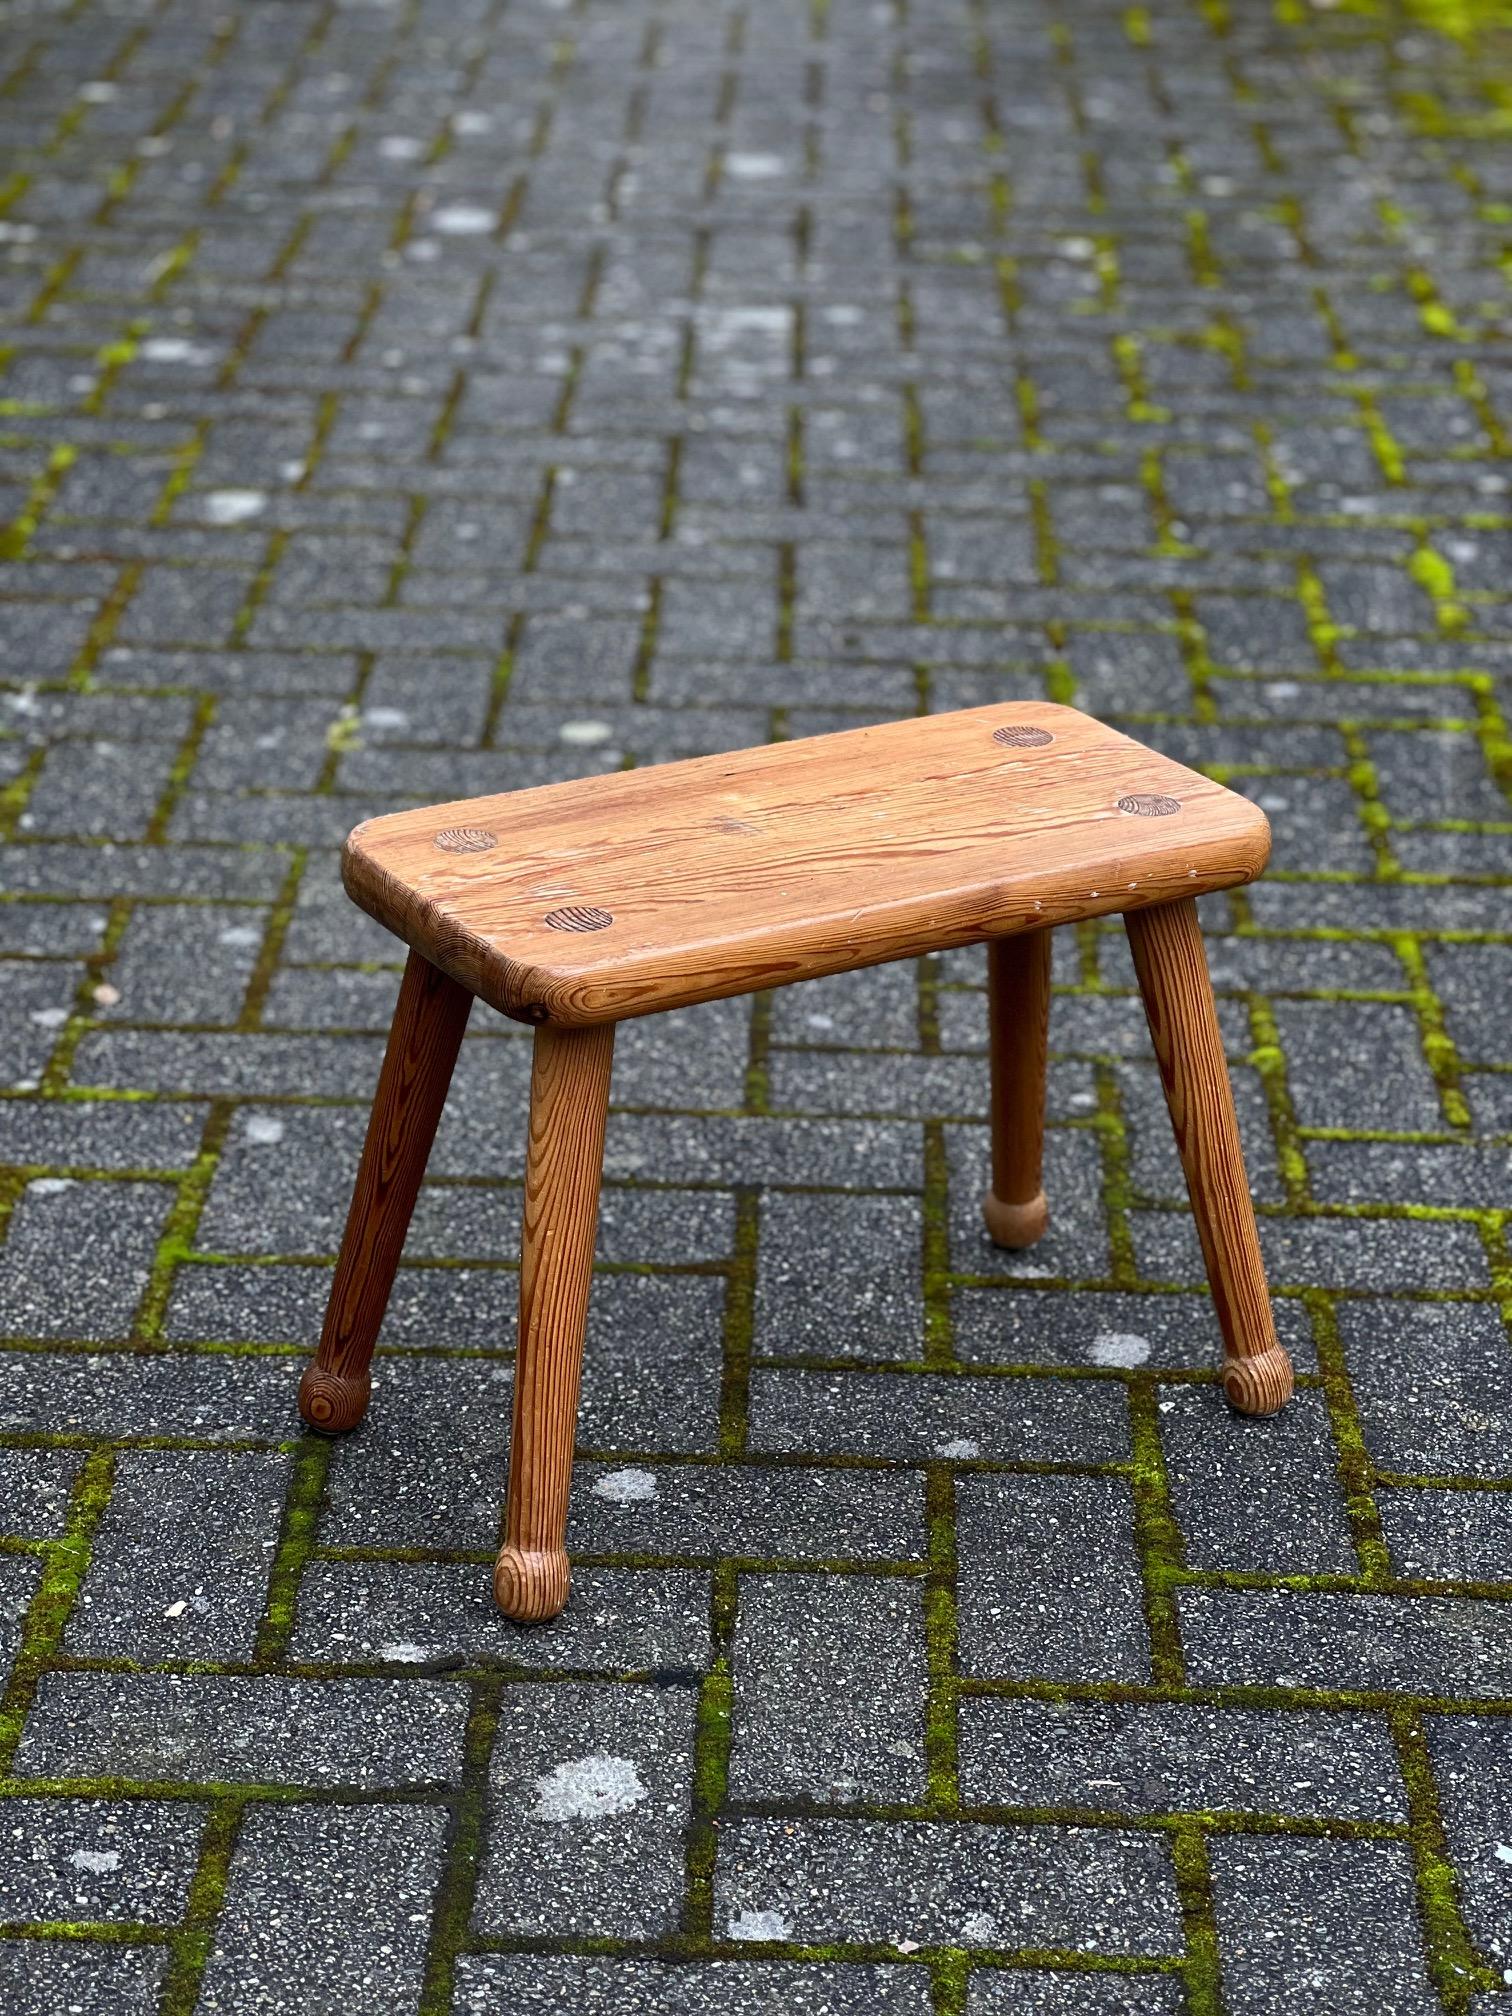 This is an elegant rectangular pine. Produced in Sweden around the 1950s. It is a beautiful shape, the grain is showing a high quality wood. The legs can be unscrewed.  Nice patina on the overall. 



Carl Malmsten (December 7, 1888 – August 13,